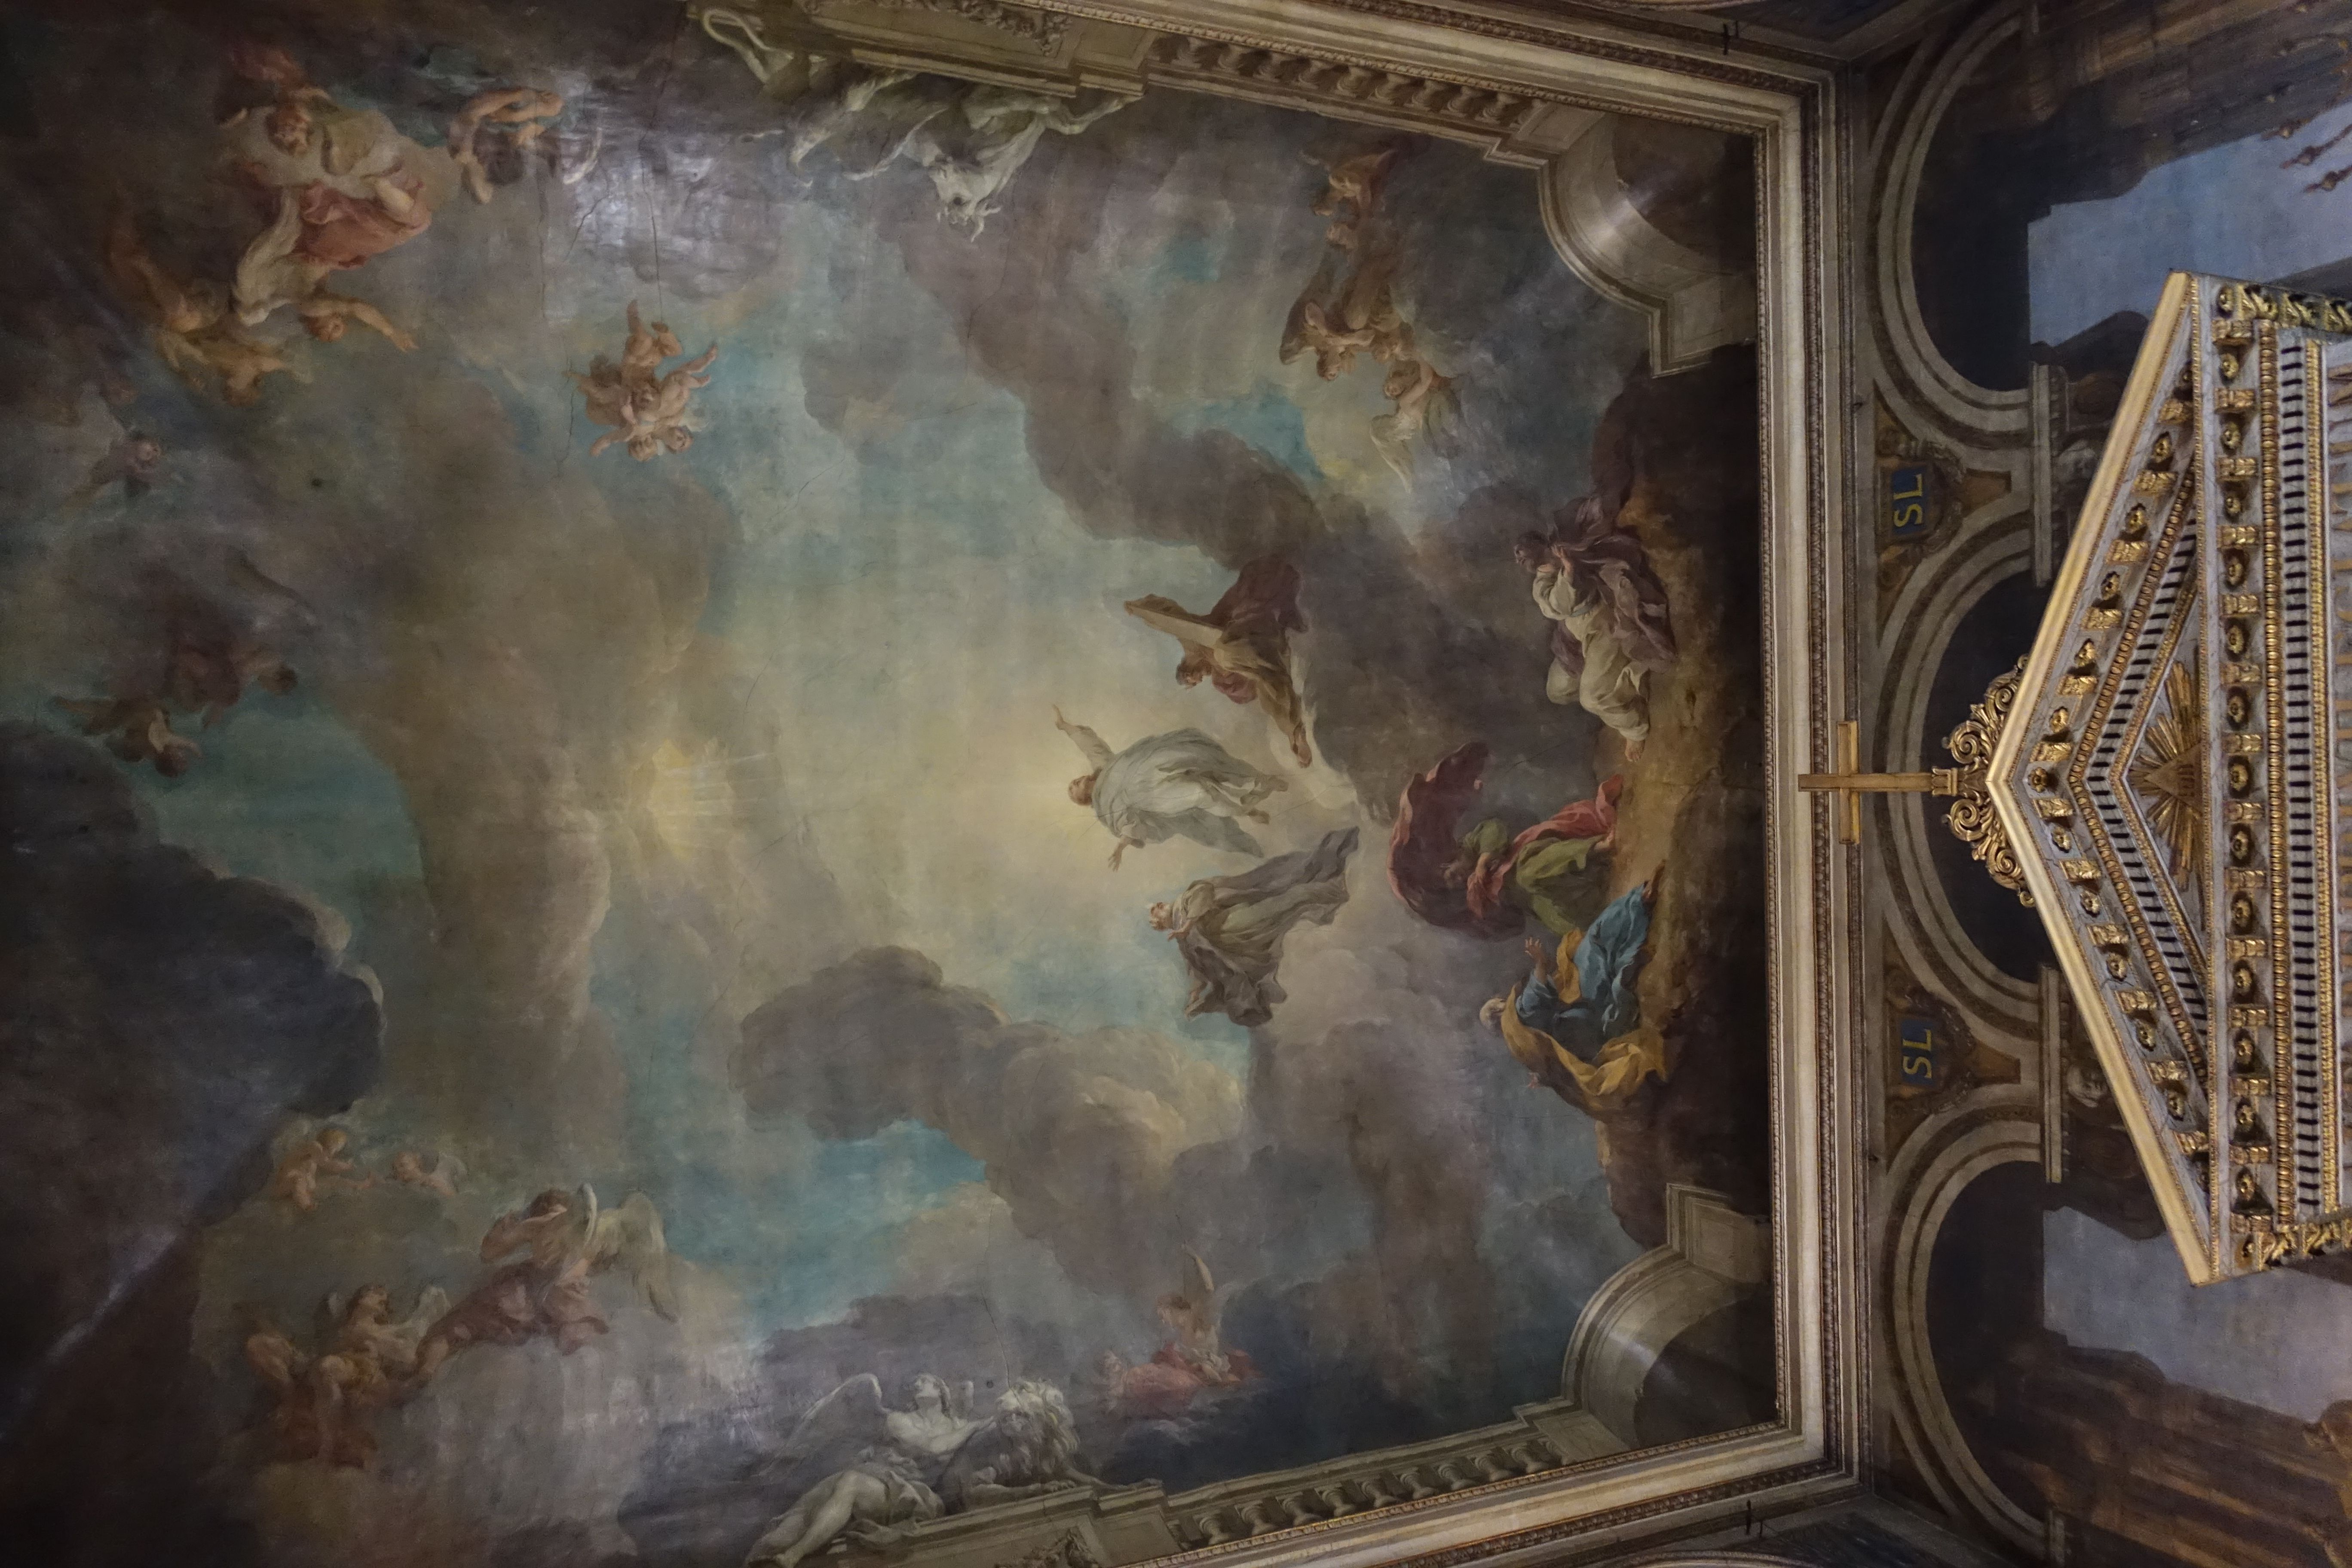 The ceiling of the cathedral is painted with religious figures. - Angelcore